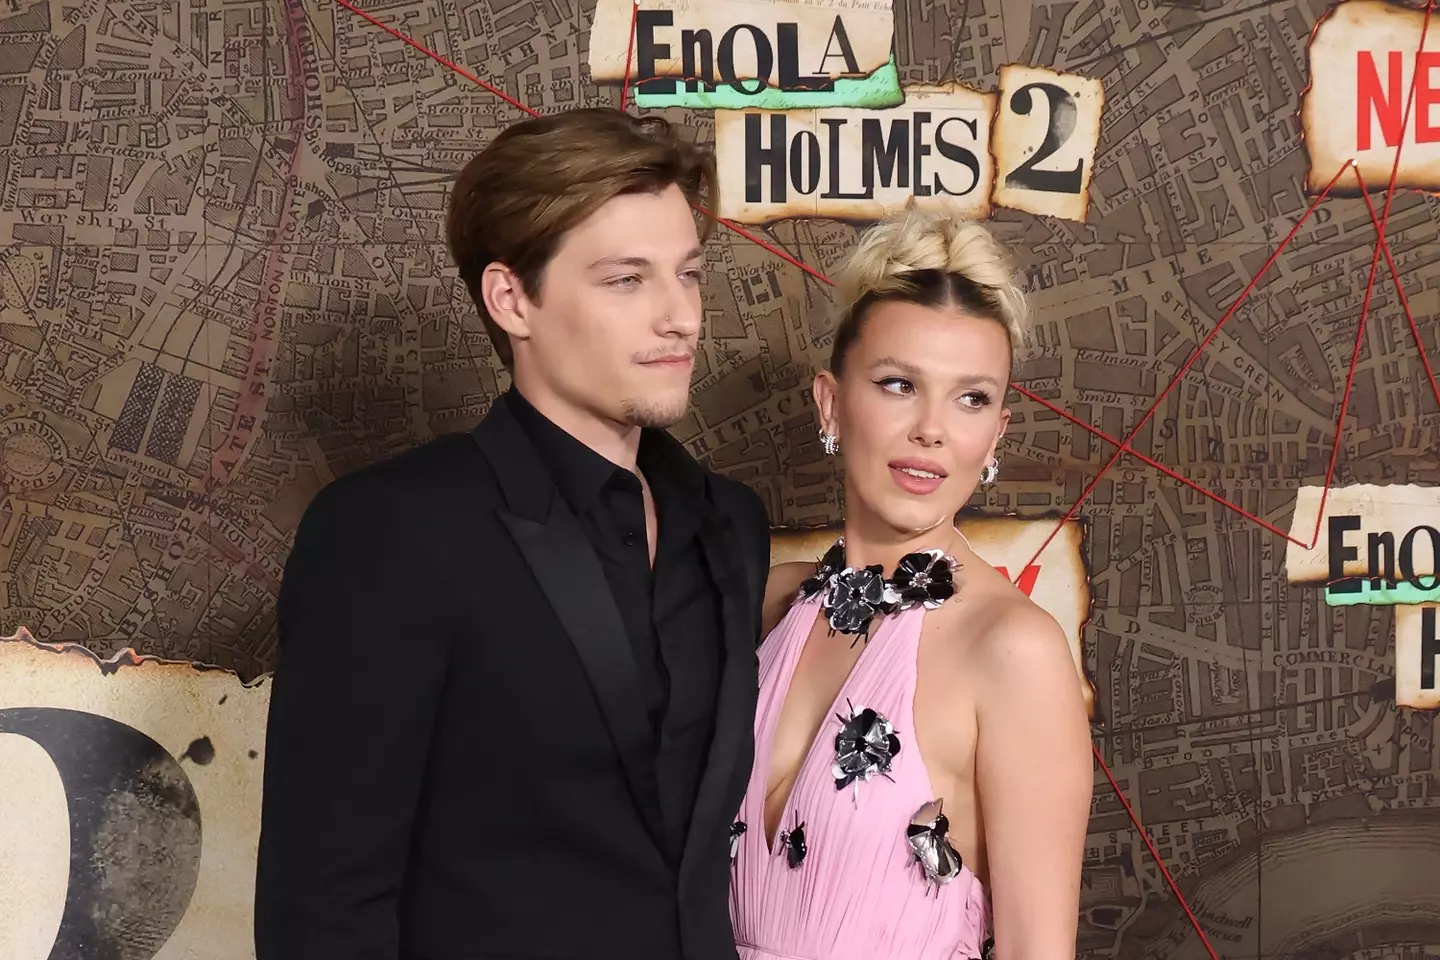 Millie Bobby Brown is now getting married to model Jake Bongiovi and is hoping for a magical day.